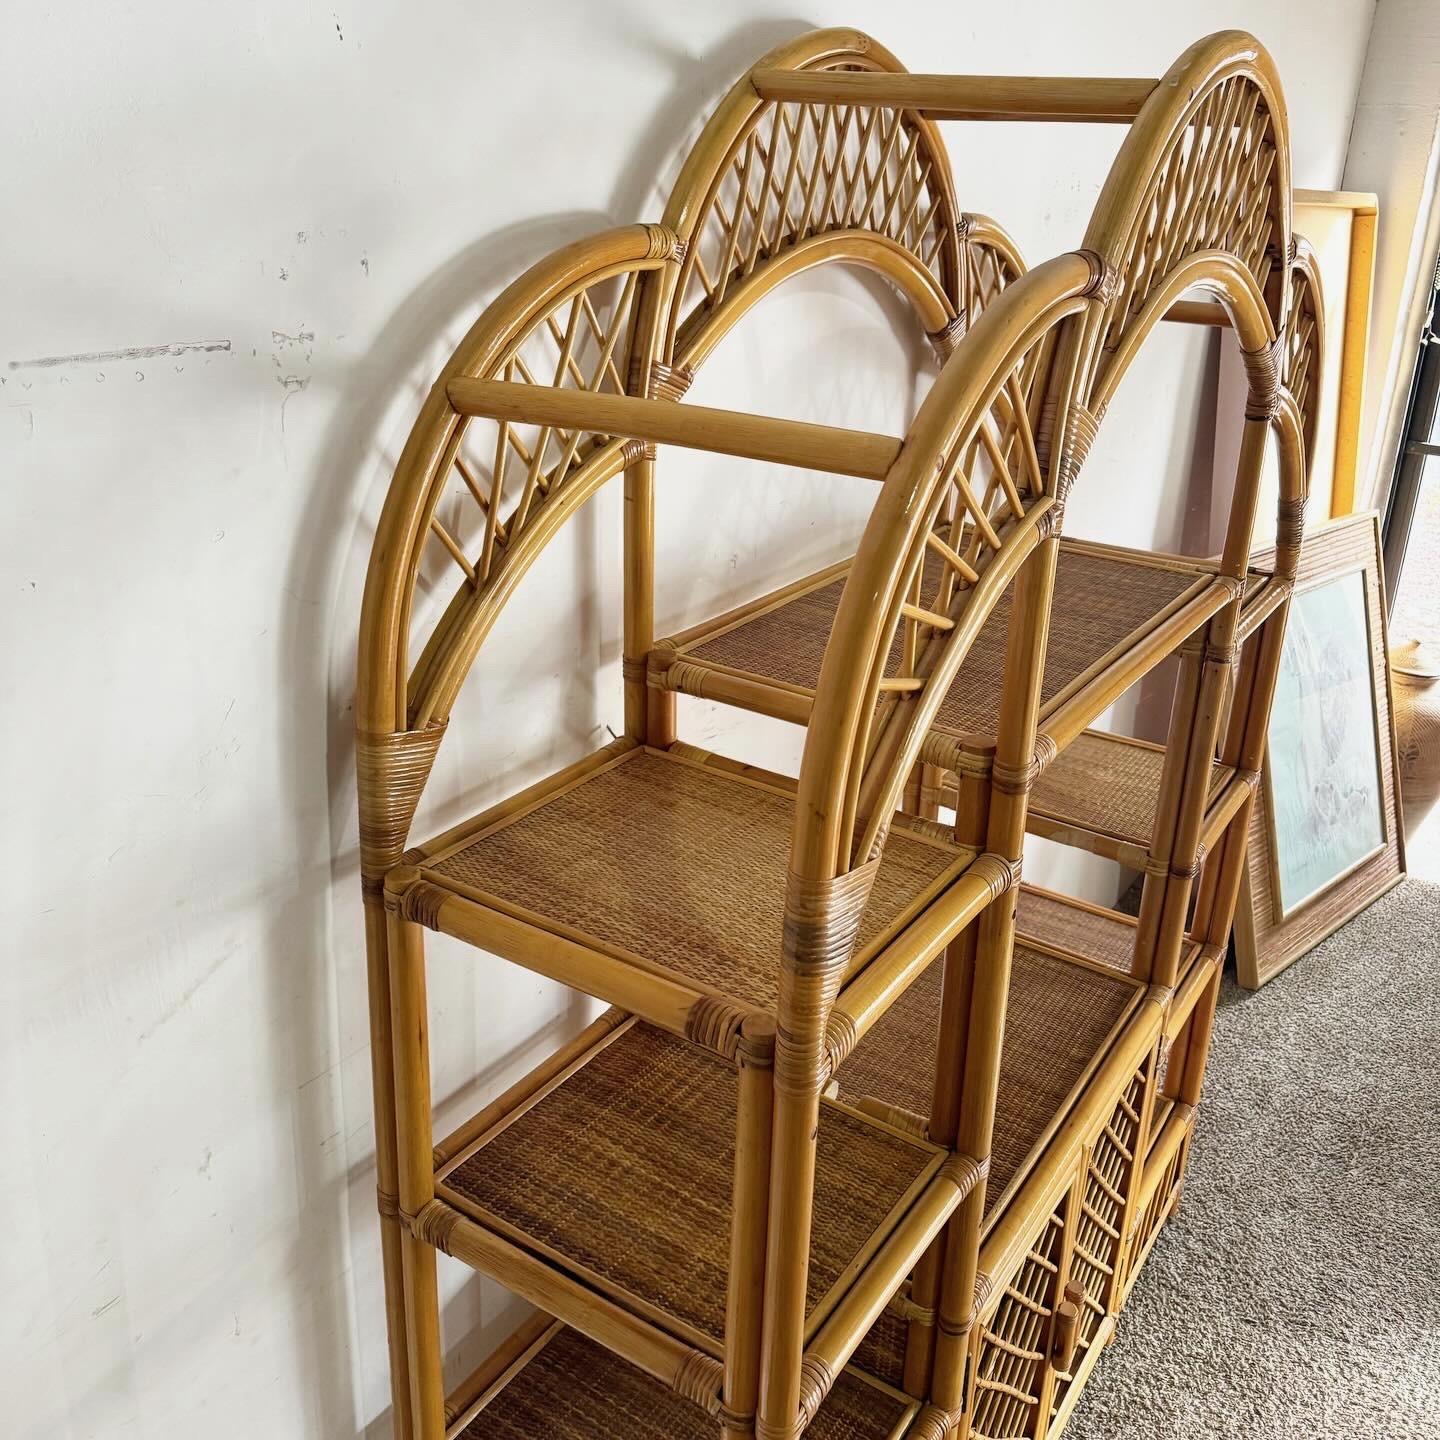 Boho Chic Arched Bamboo Rattan and Wicker Etagere For Sale 2